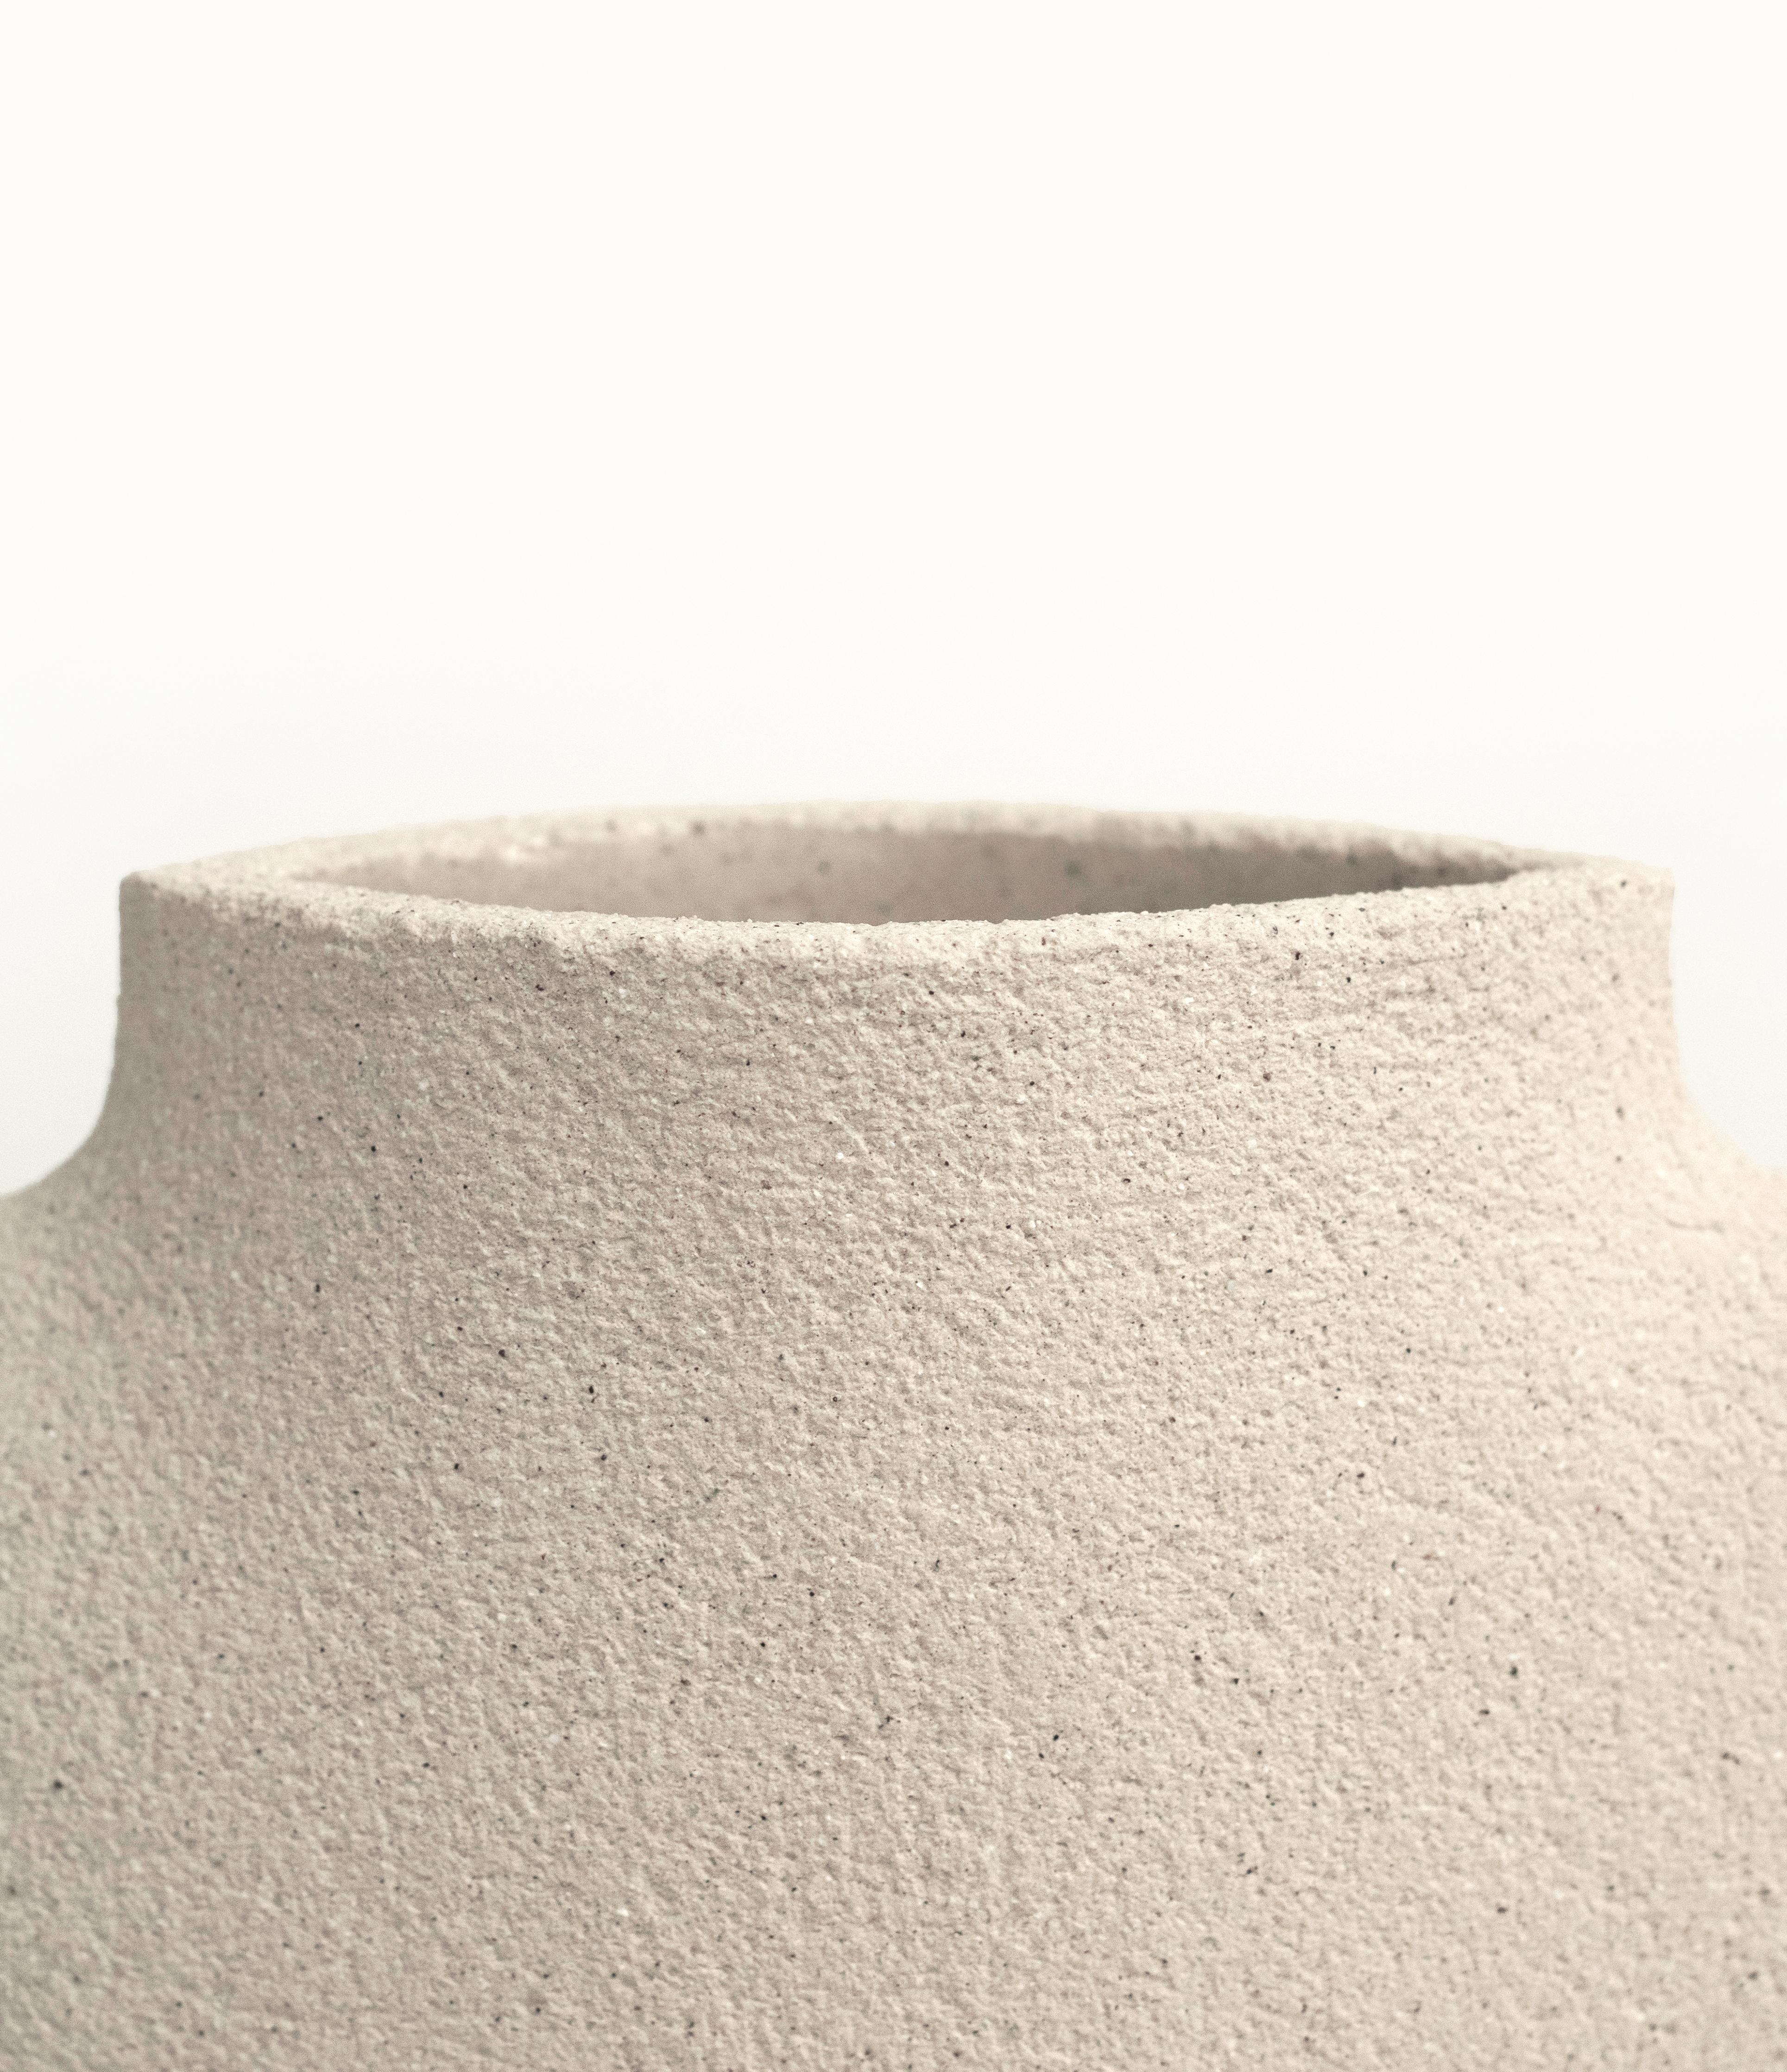 Minimalist 21st Century Ailes N°2 Vase in White Ceramic, Hand-Crafted in France